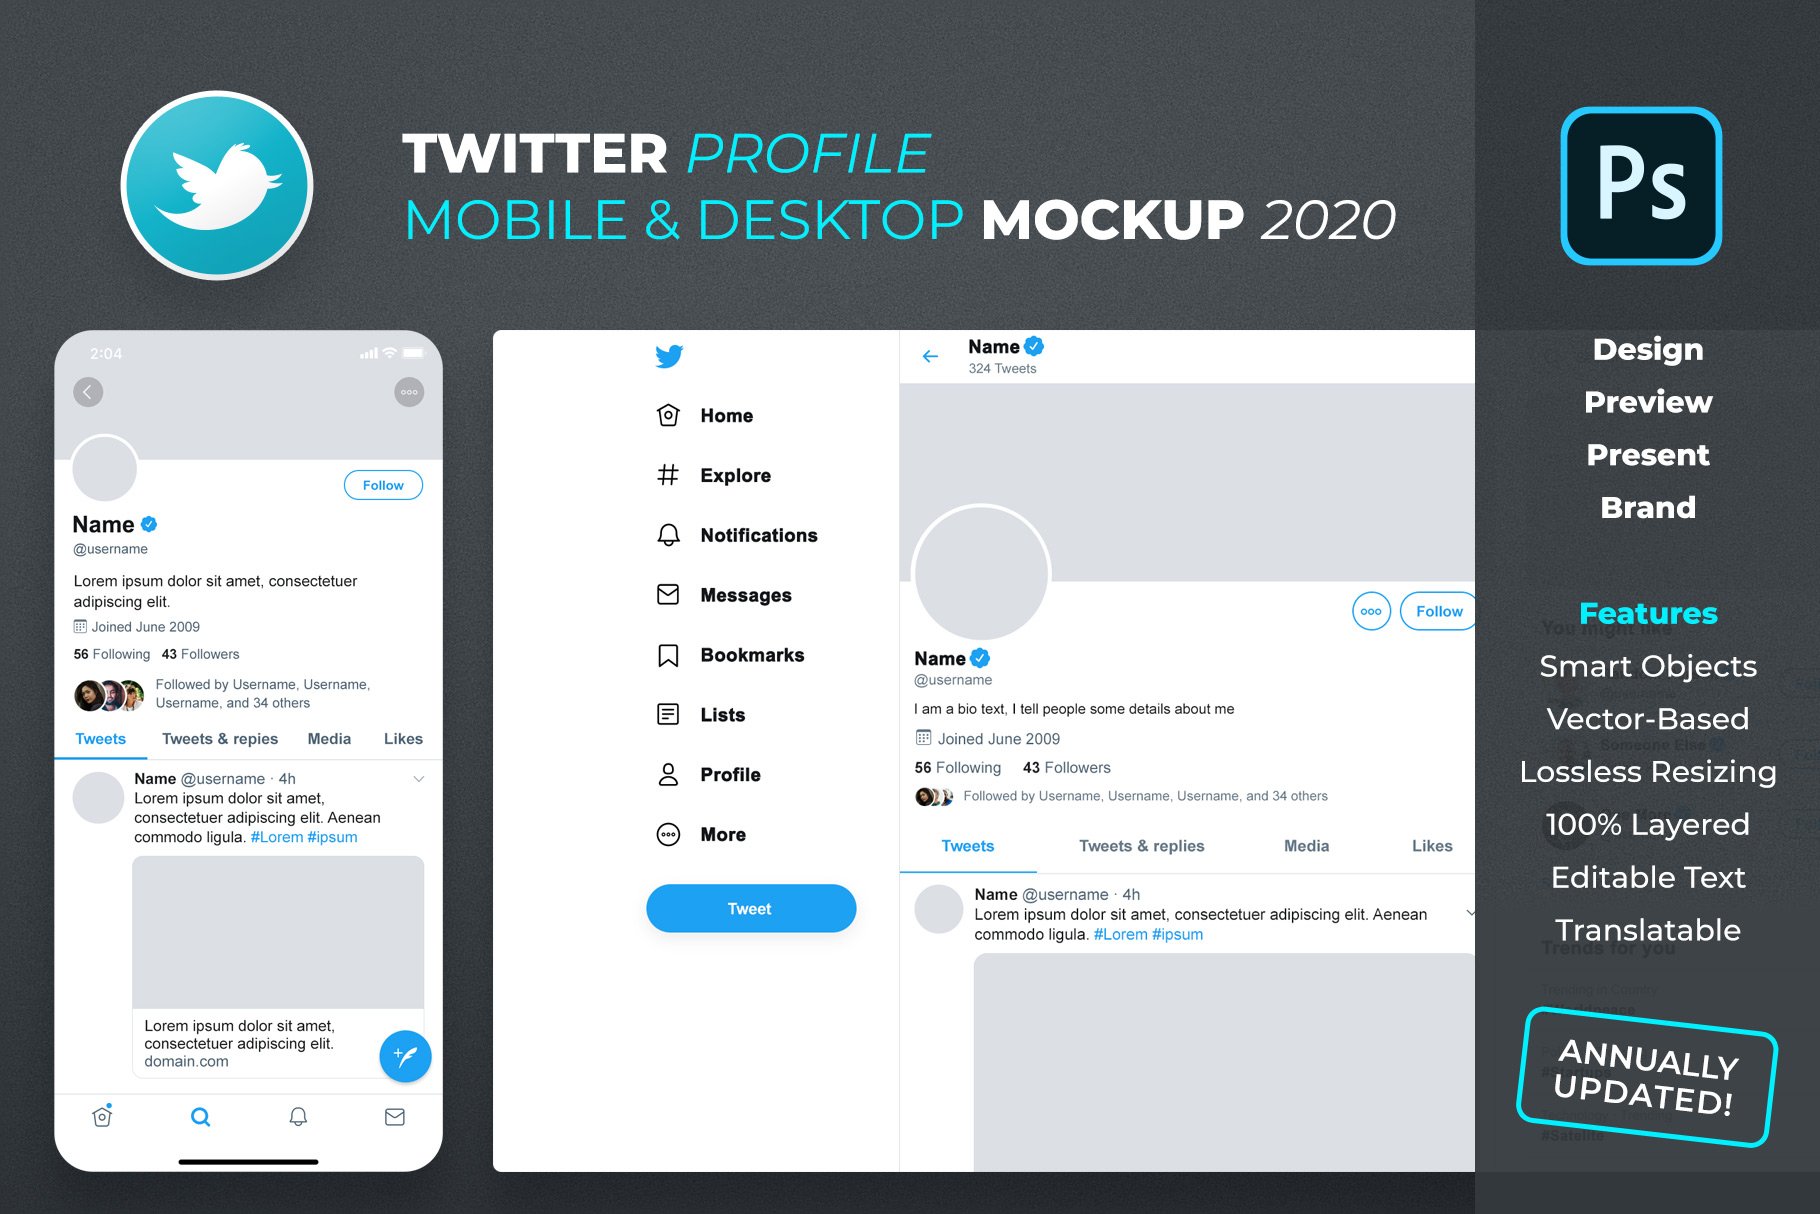 Twitter Profile Mockup cover image.